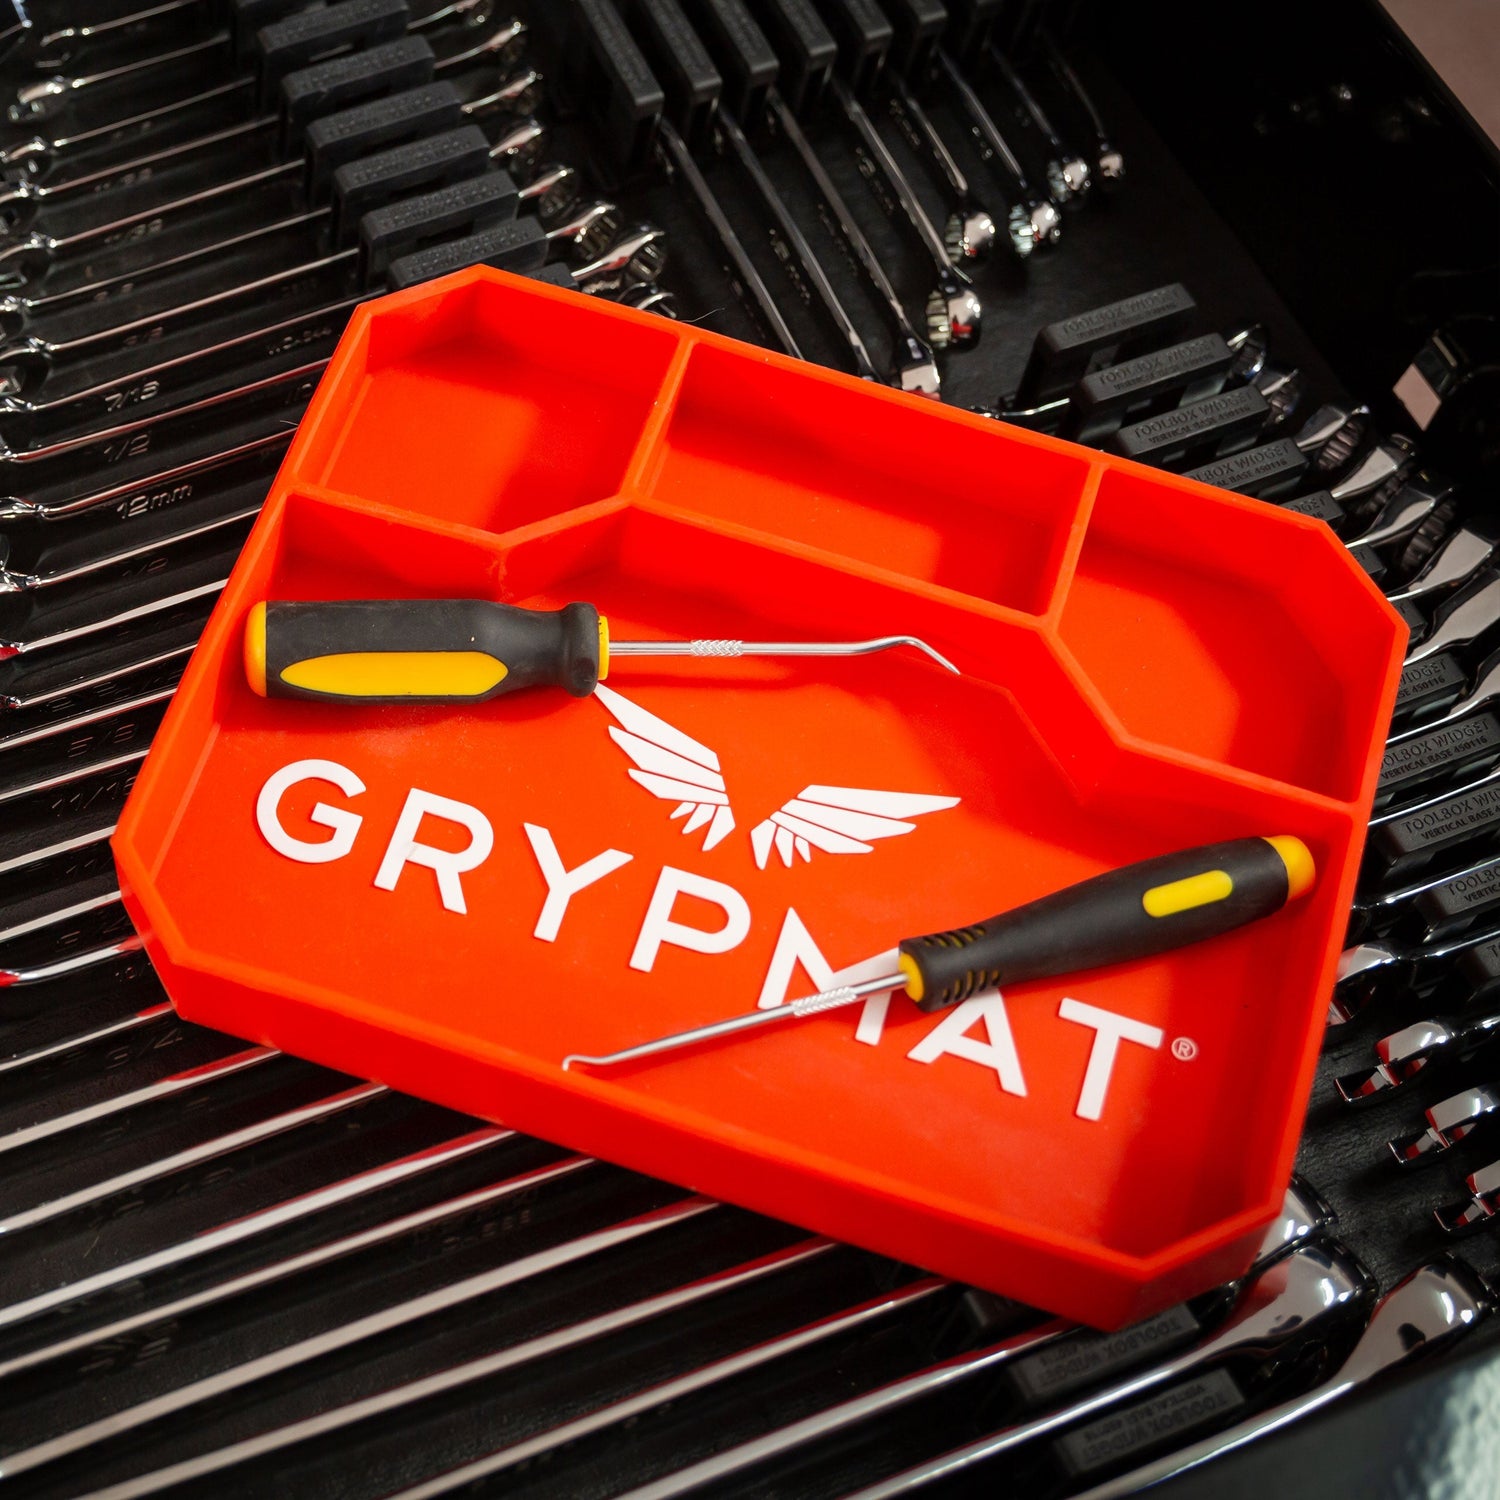 Grypmat Plus - Duo - Orange by Aircraft Spruce